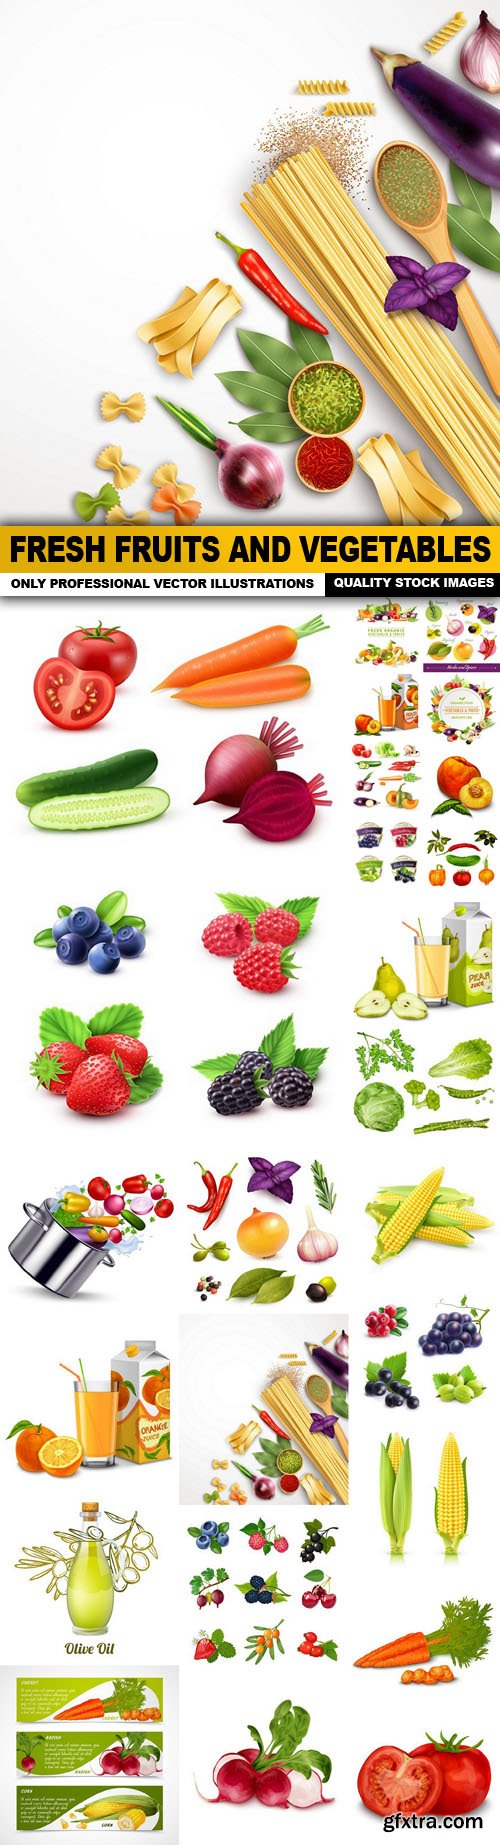 Fresh Fruits And Vegetables - 25 Vector